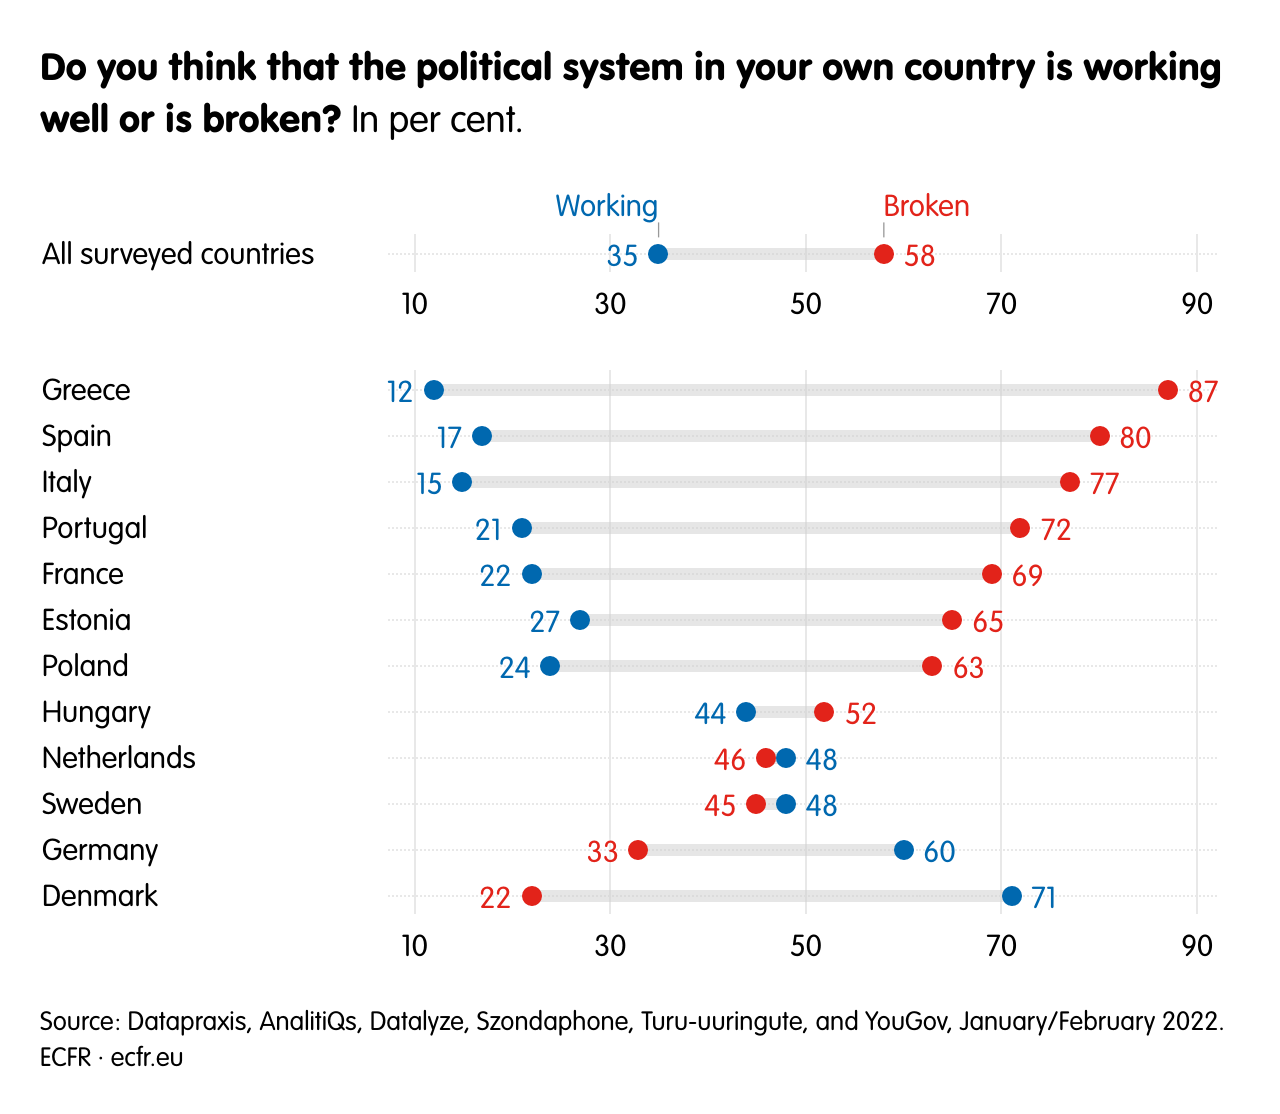 Do you think that the political system in your own country is working well or is broken?